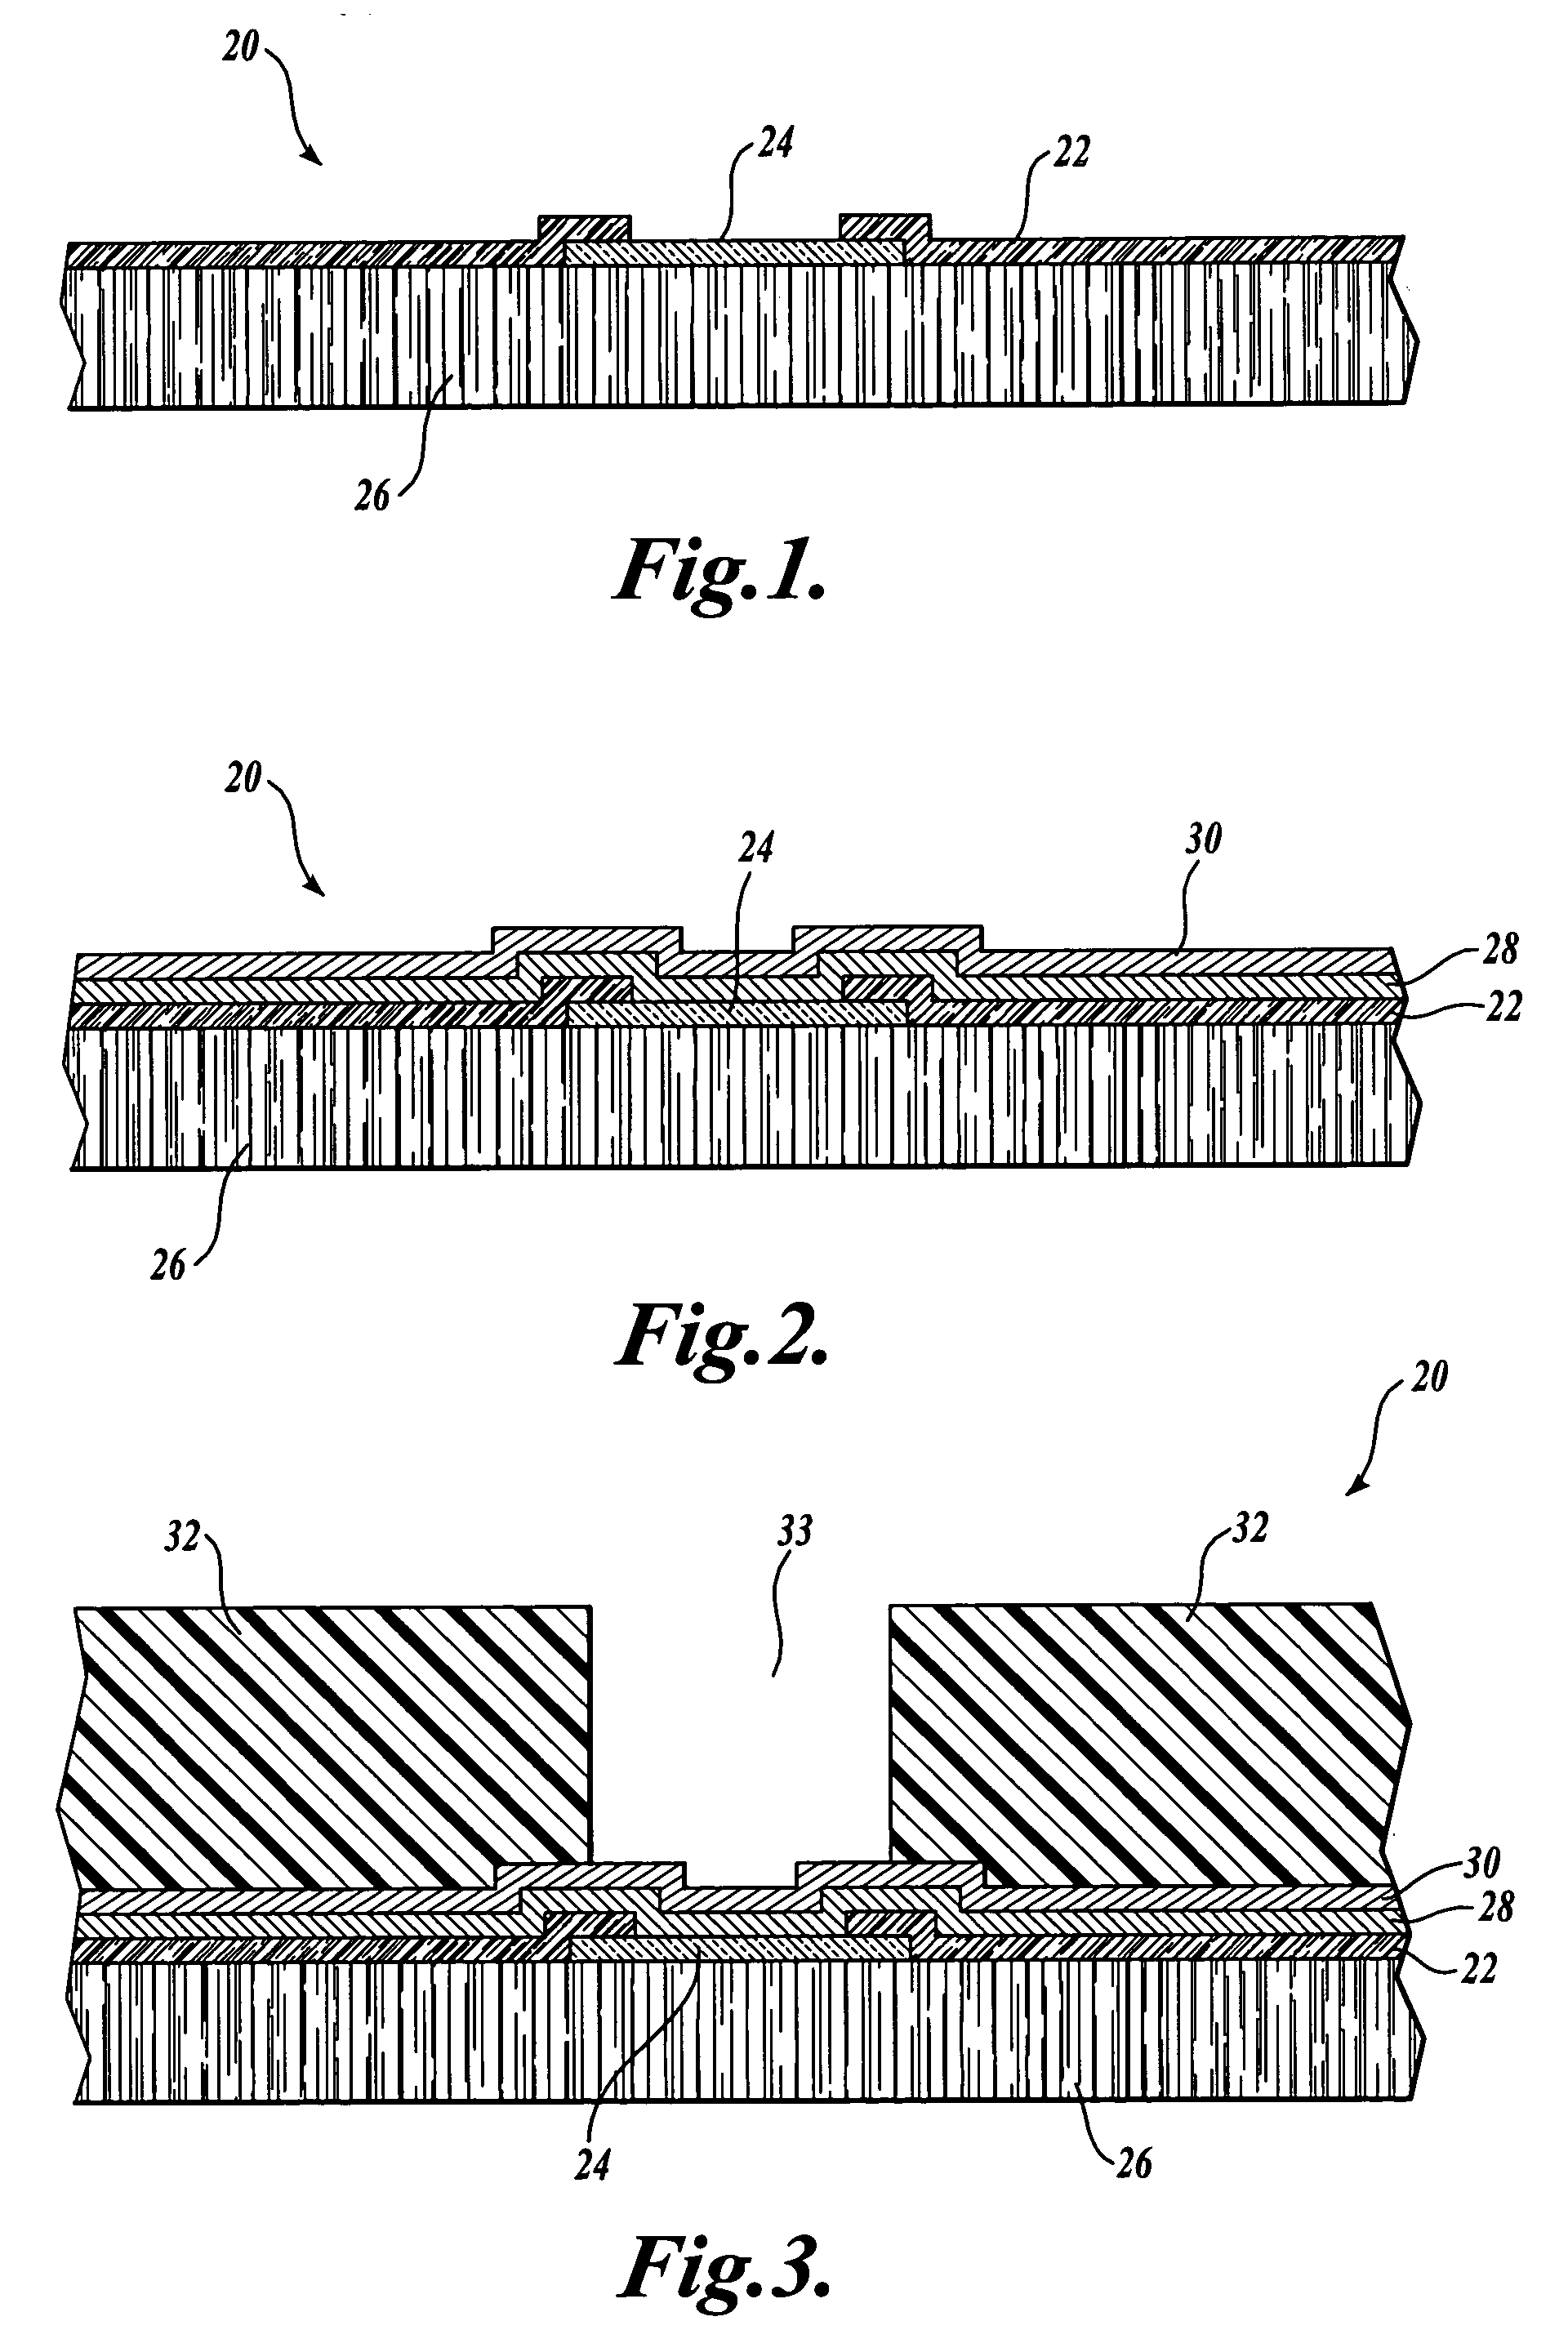 Bath and method for high rate copper deposition